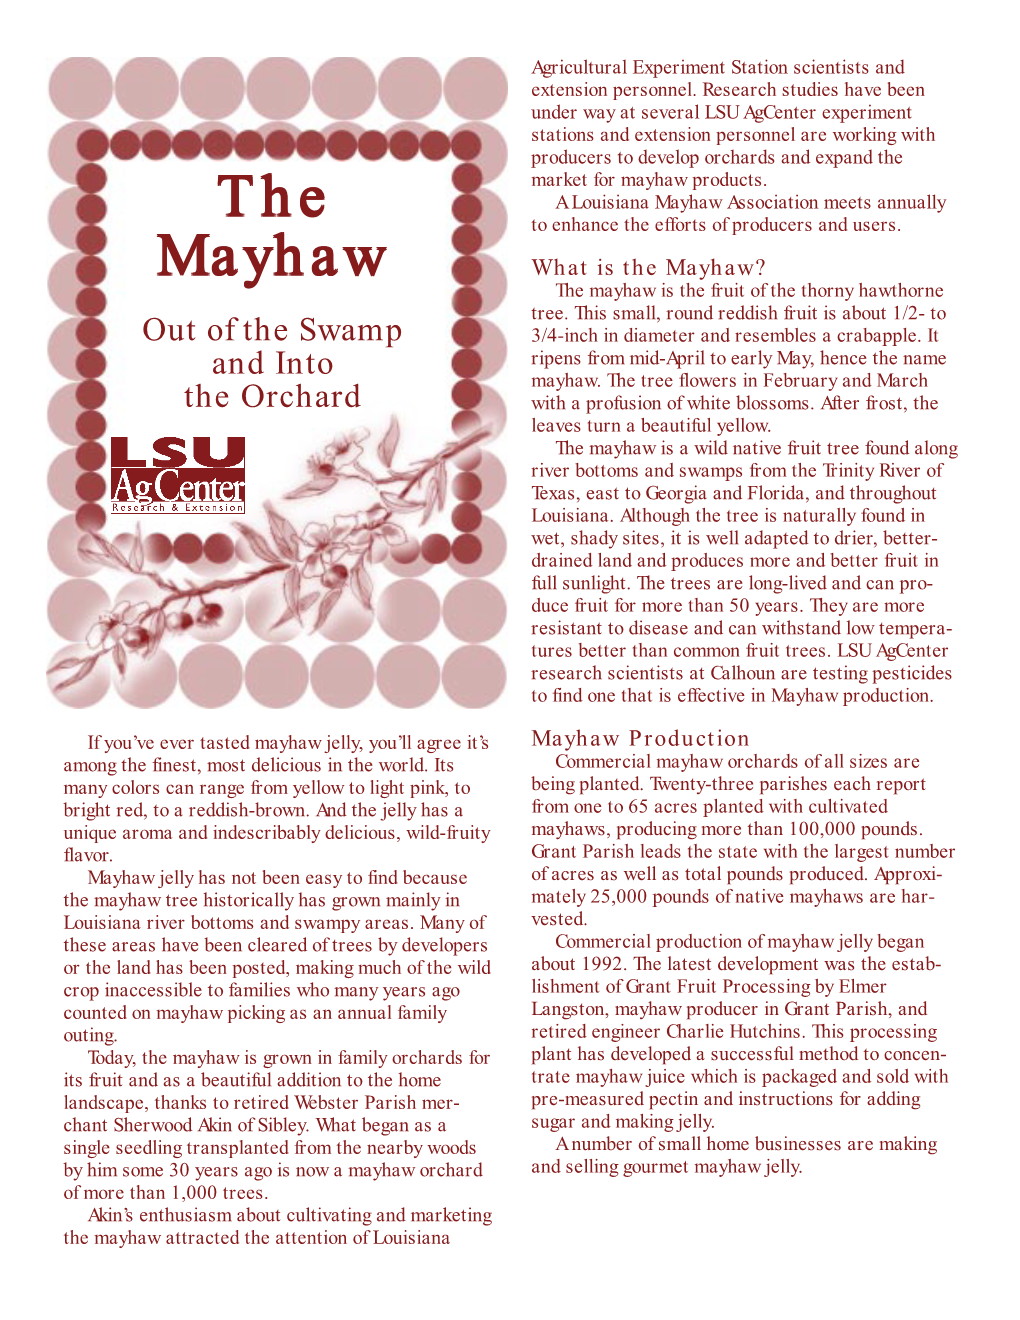 The Mayhaw? the Mayhaw Is the Fruit of the Thorny Hawthorne Tree